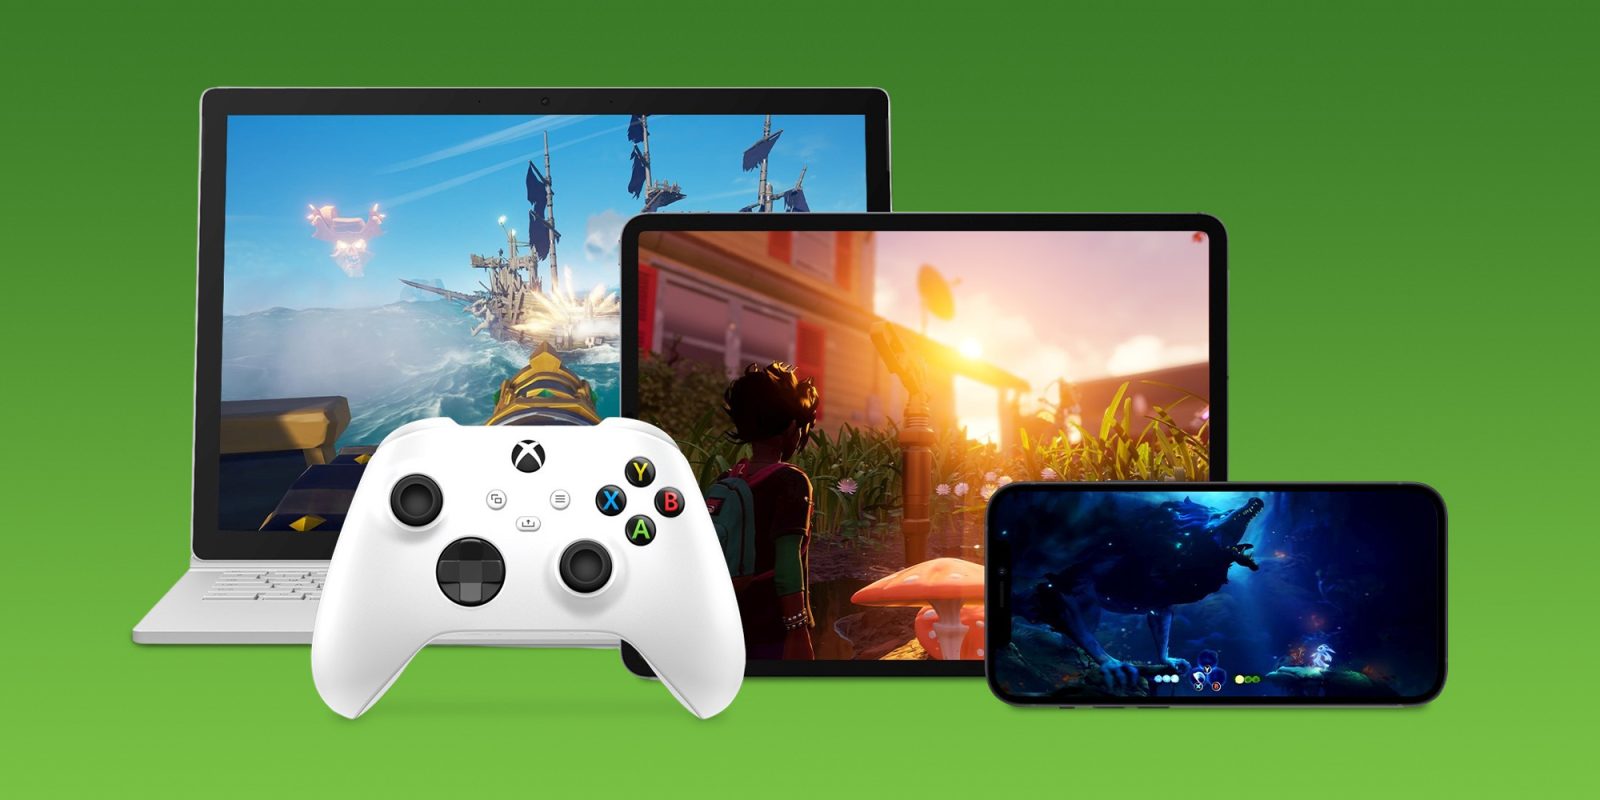 Microsoft is investigating problems launching Xbox One and PC games